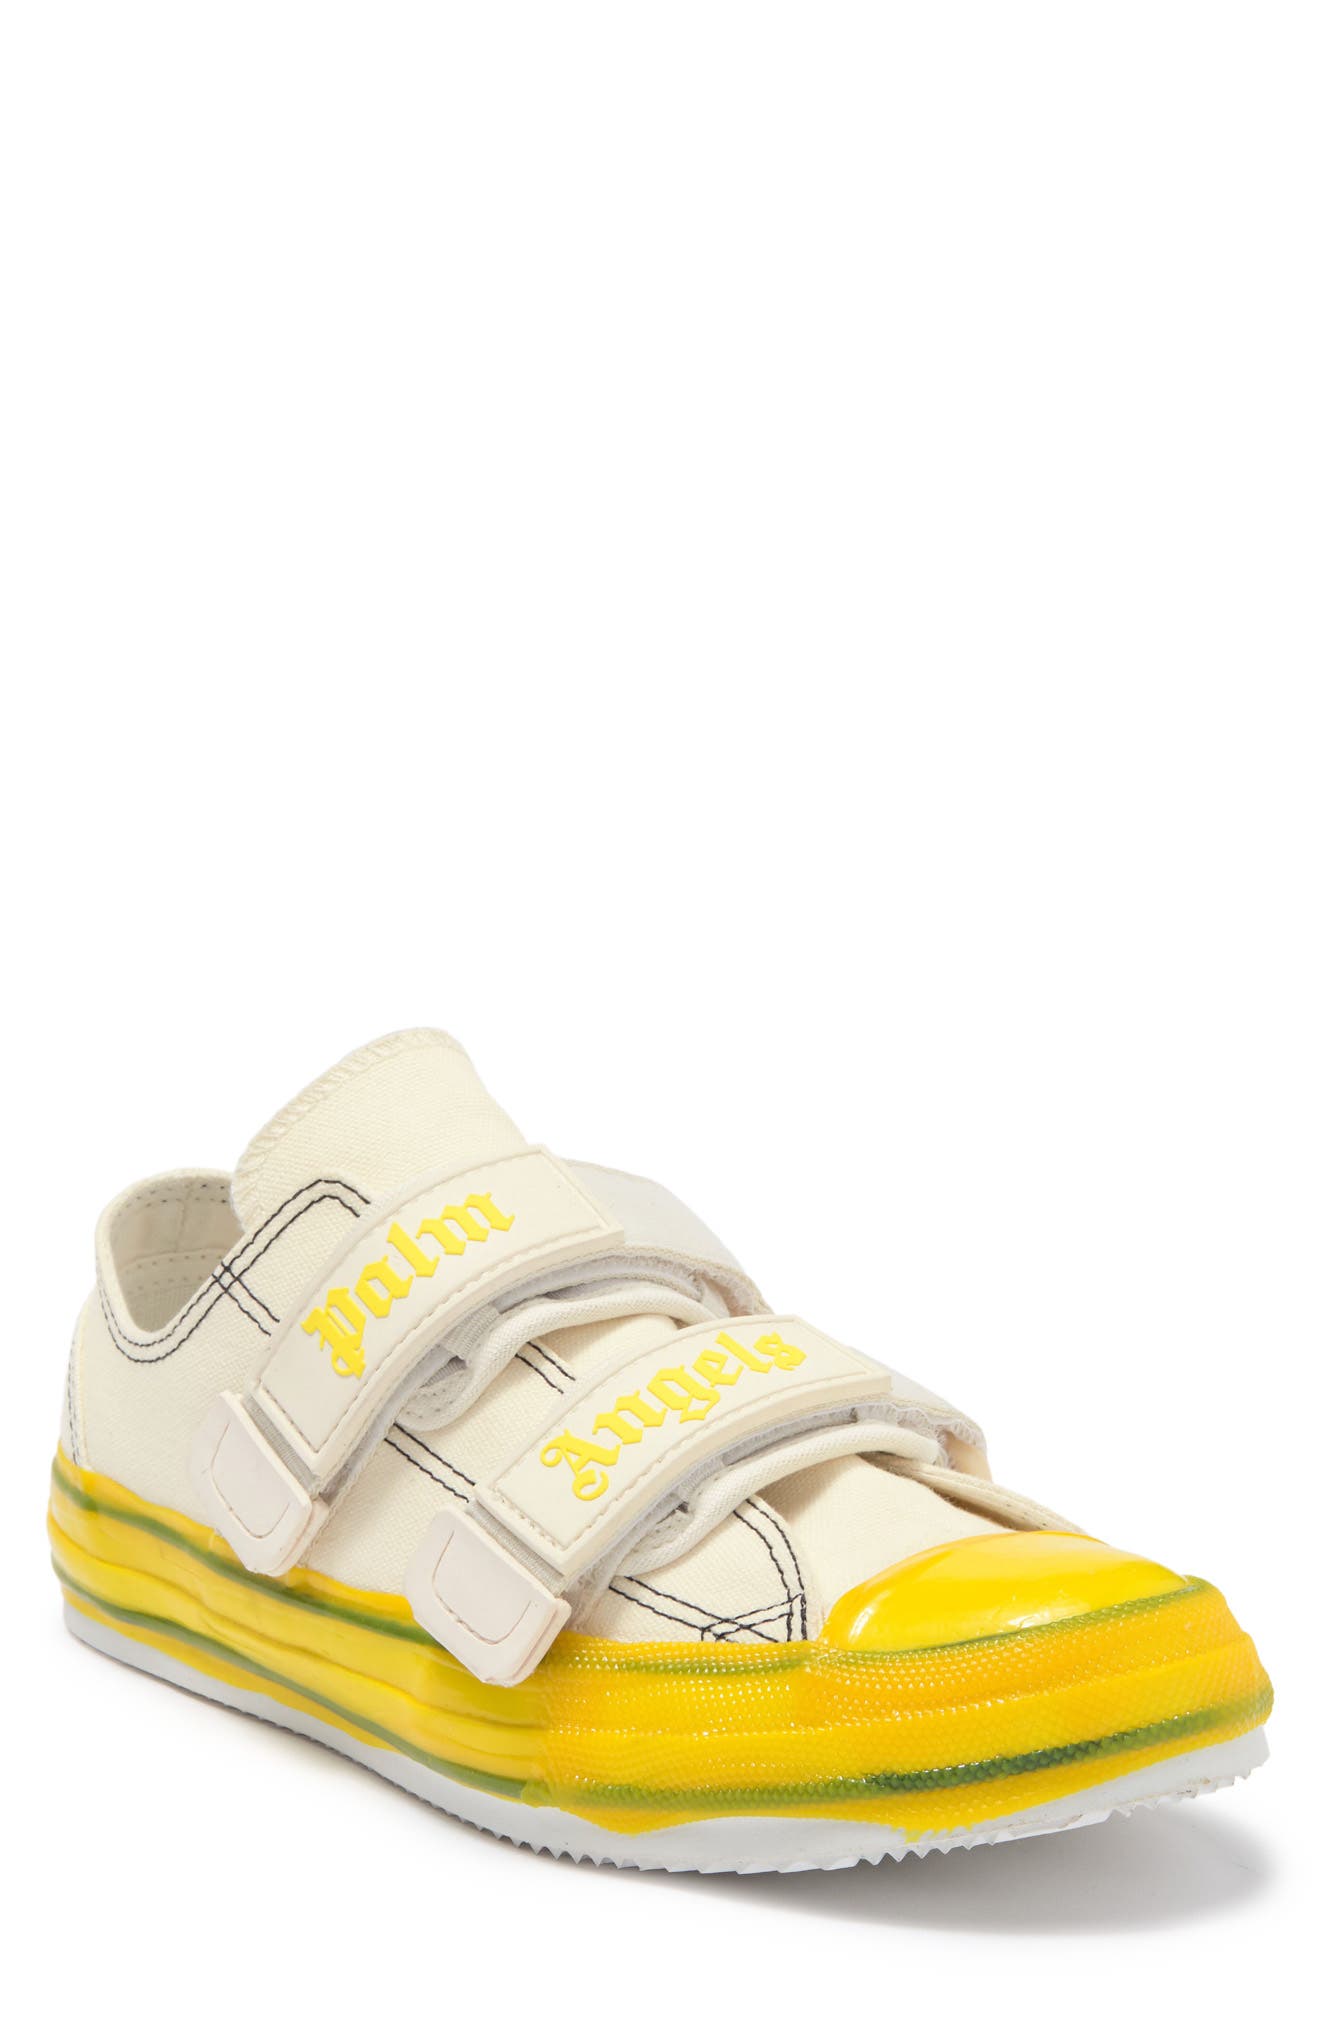 Palm Angels Vulcanized Low Top Sneaker In White Yellow